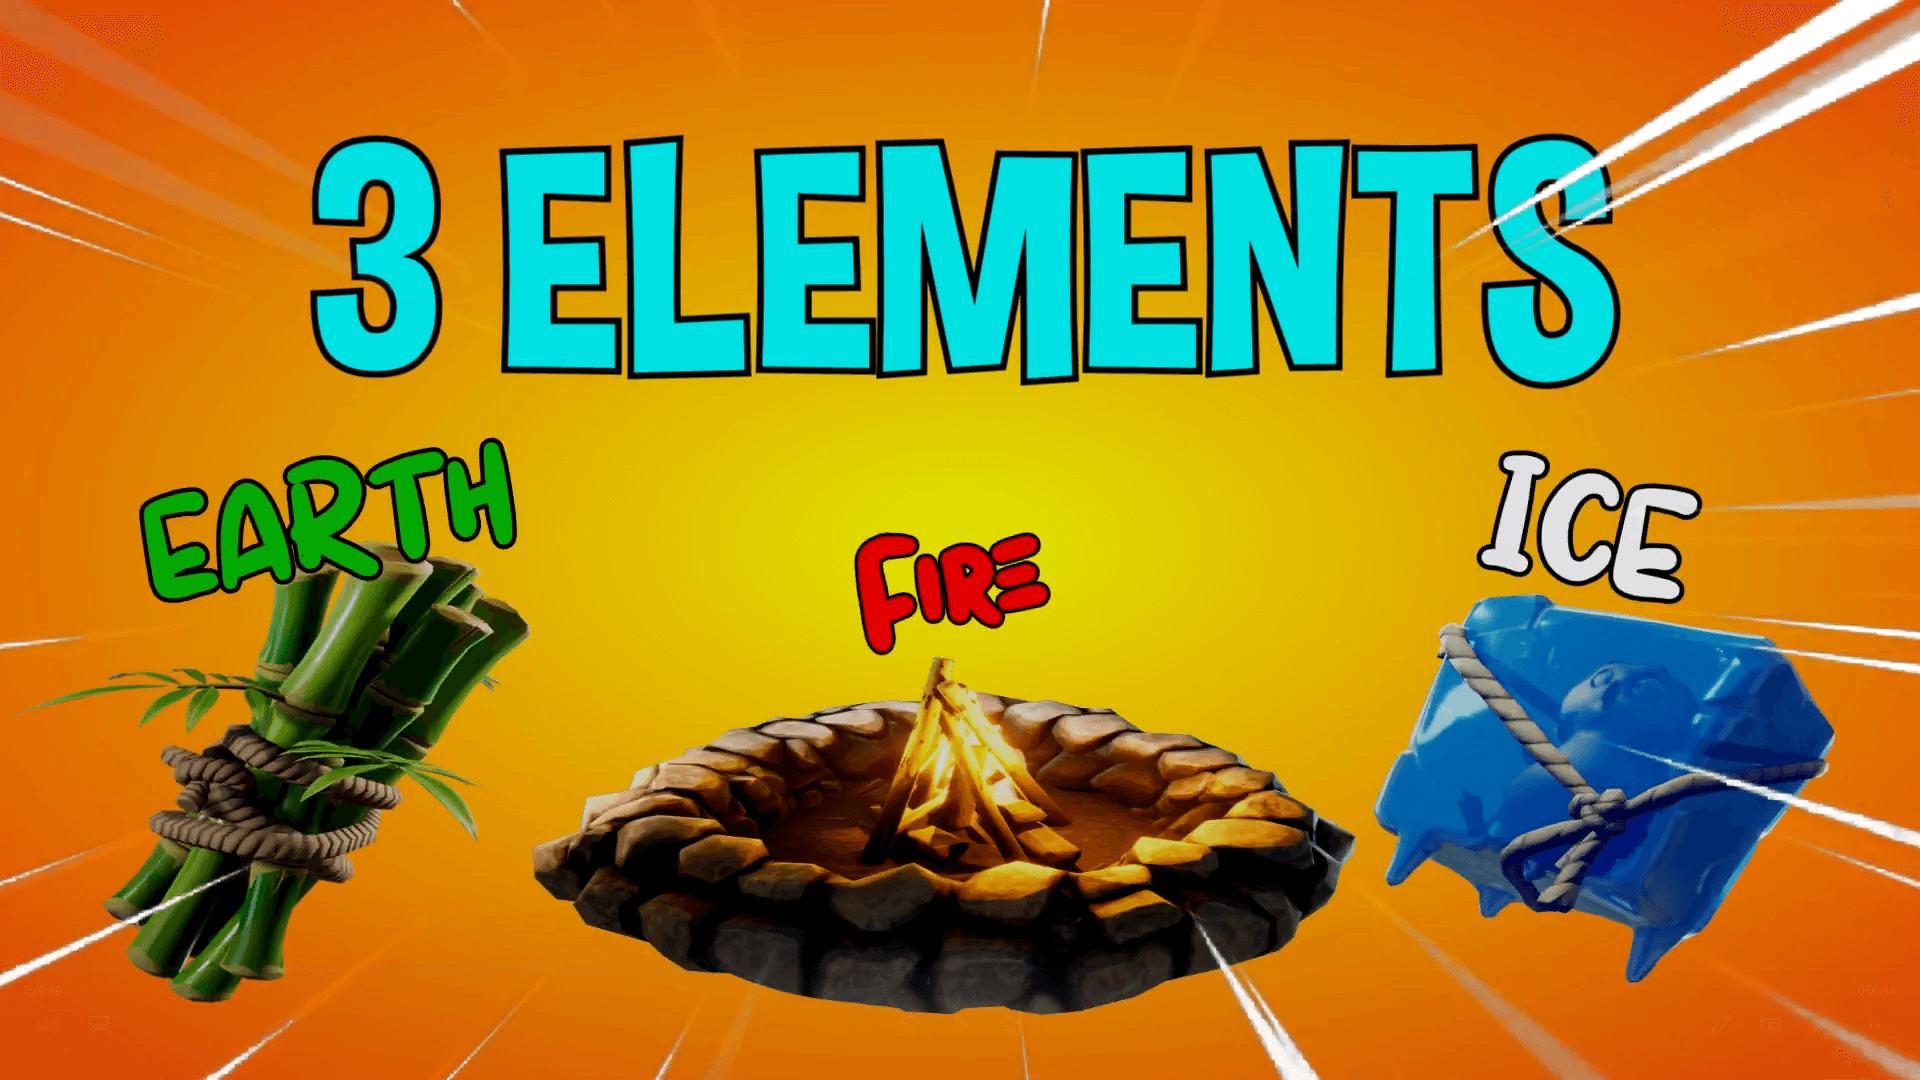 ELEMENTOR (EARTH, ICE, AND FIRE)